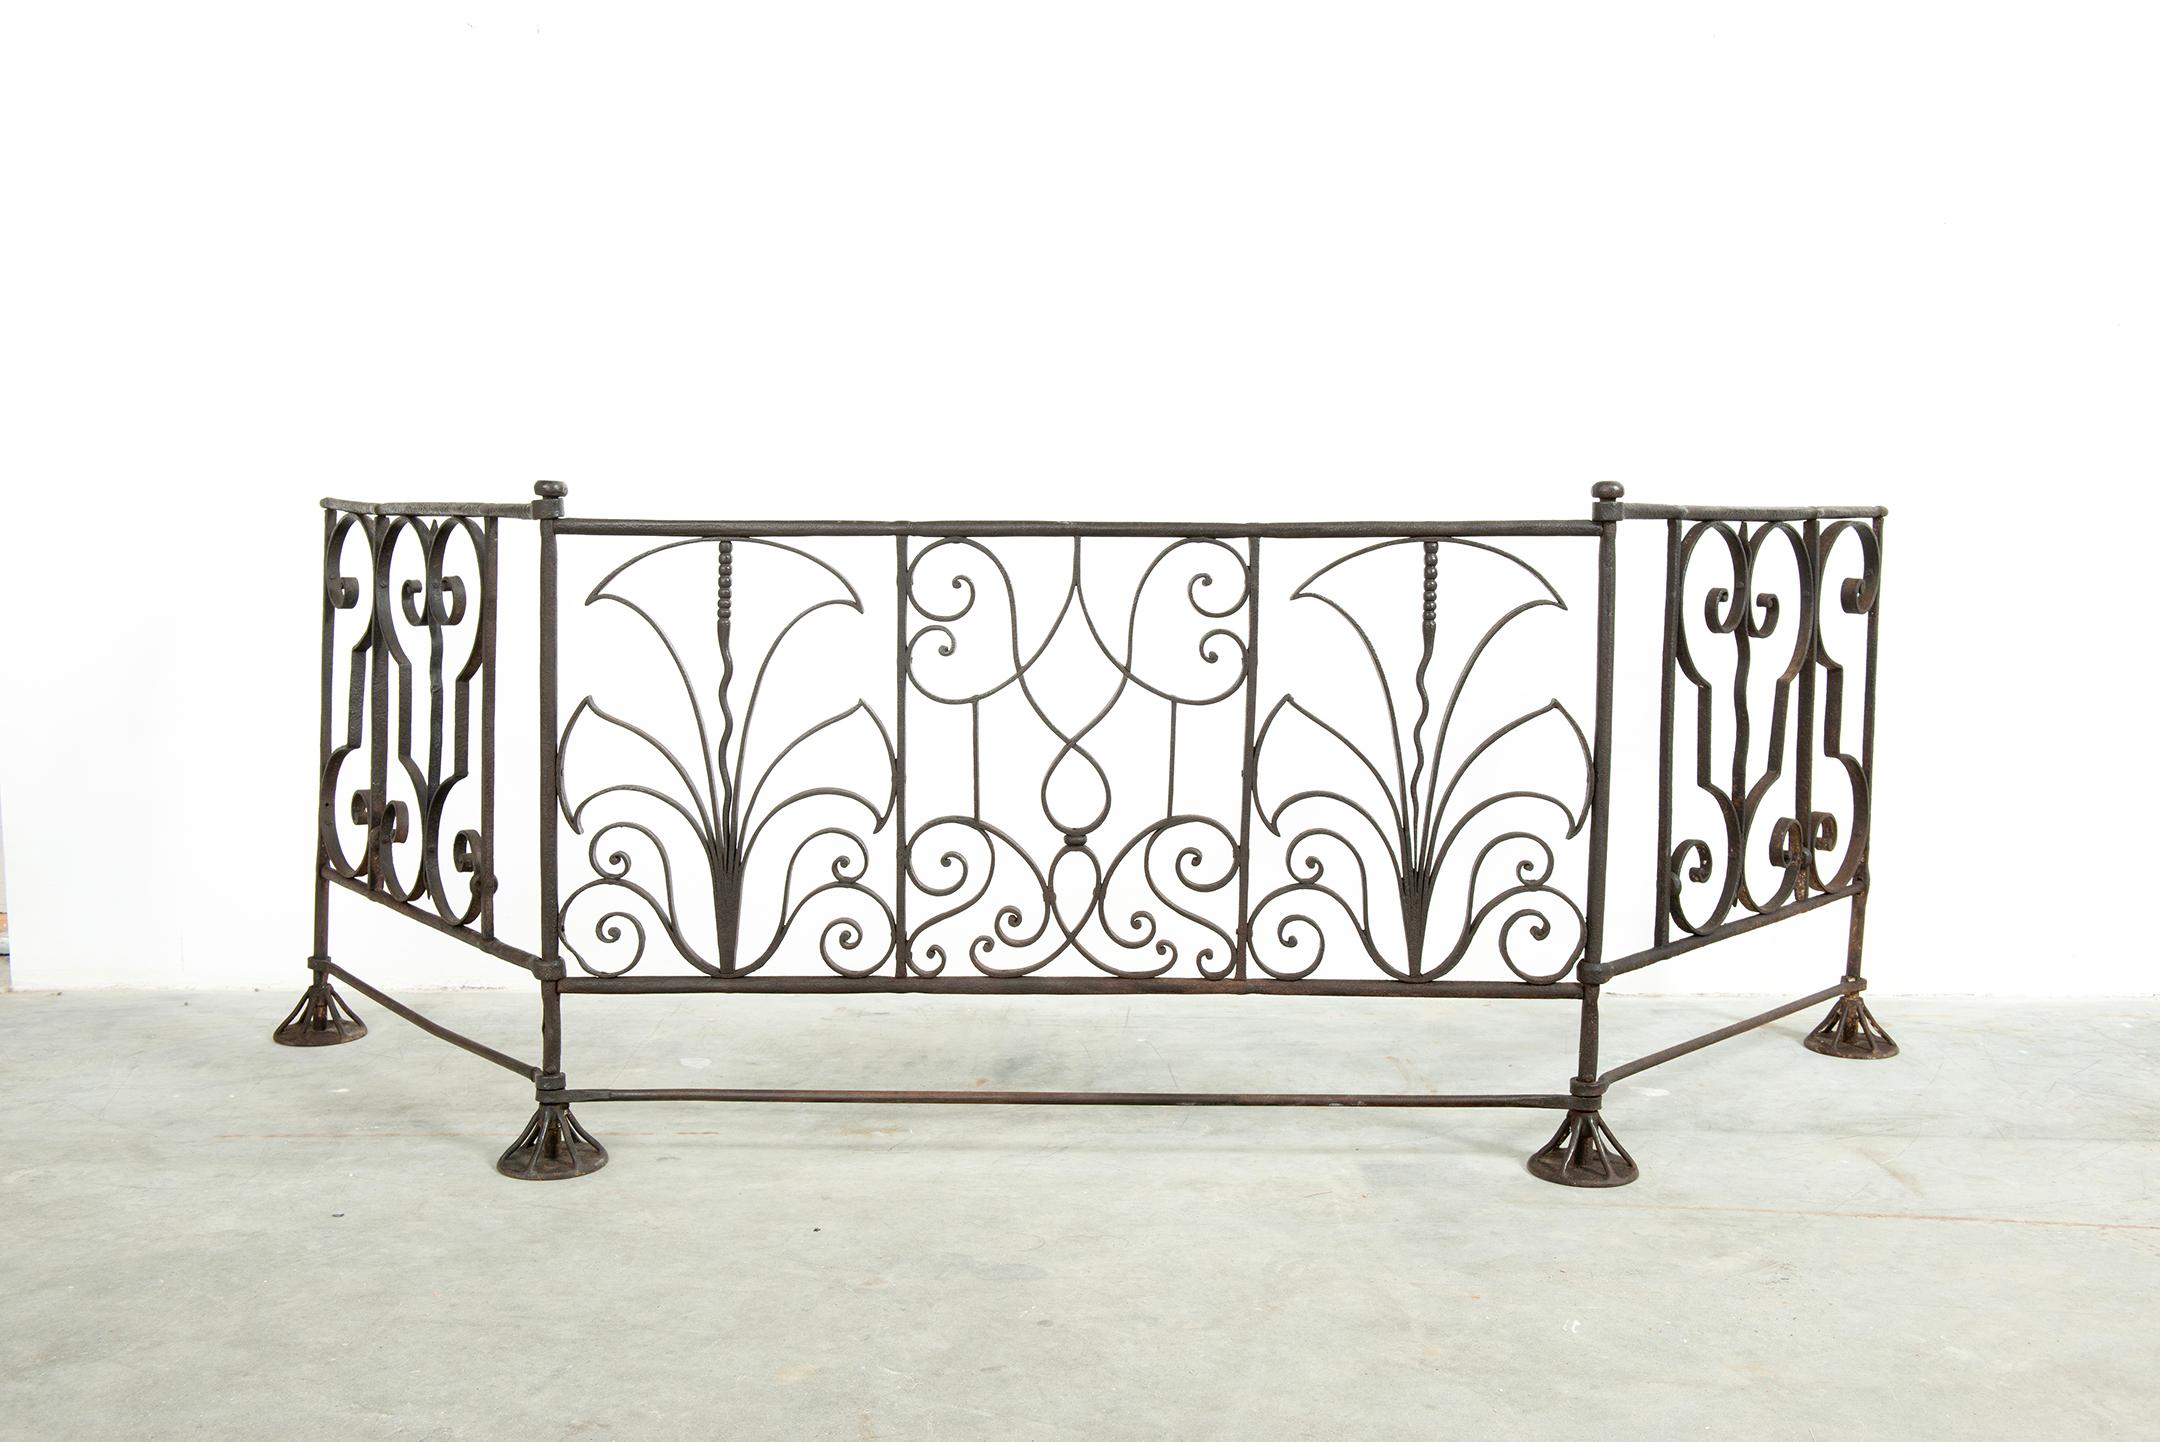 Happy to offer this very attractive and rare 17th century French firescreen or gate.

This amazingly crafted gate is in perfect condition and super sturdy.
The round feet carry the three section with grace but give it the support necessary.
Its